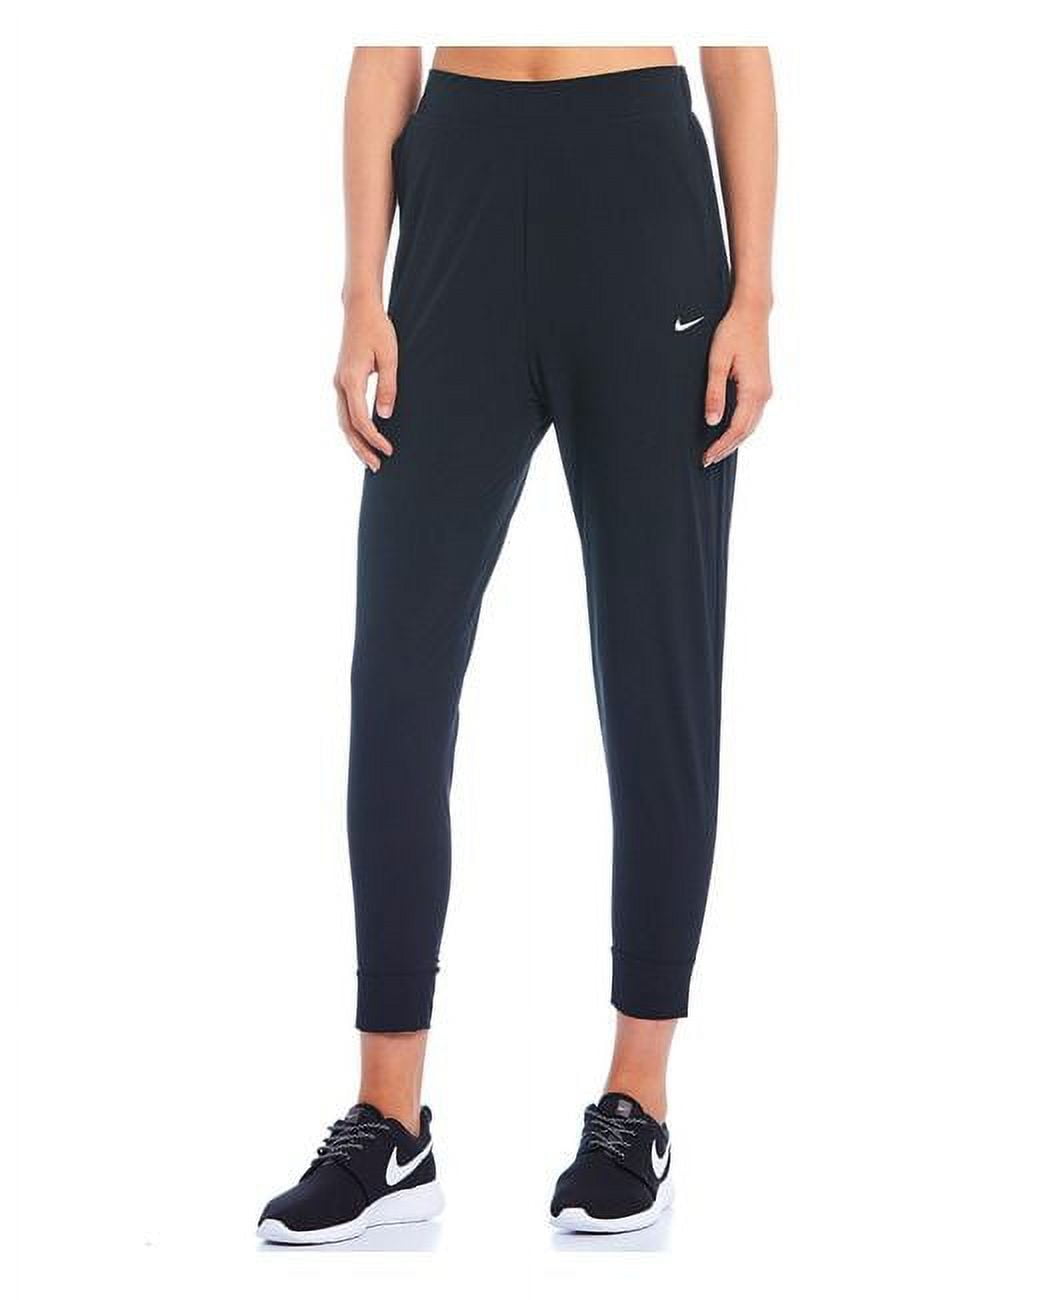 Nike Women's Bliss Victory Slim Fit Training Pants, Navy, Large